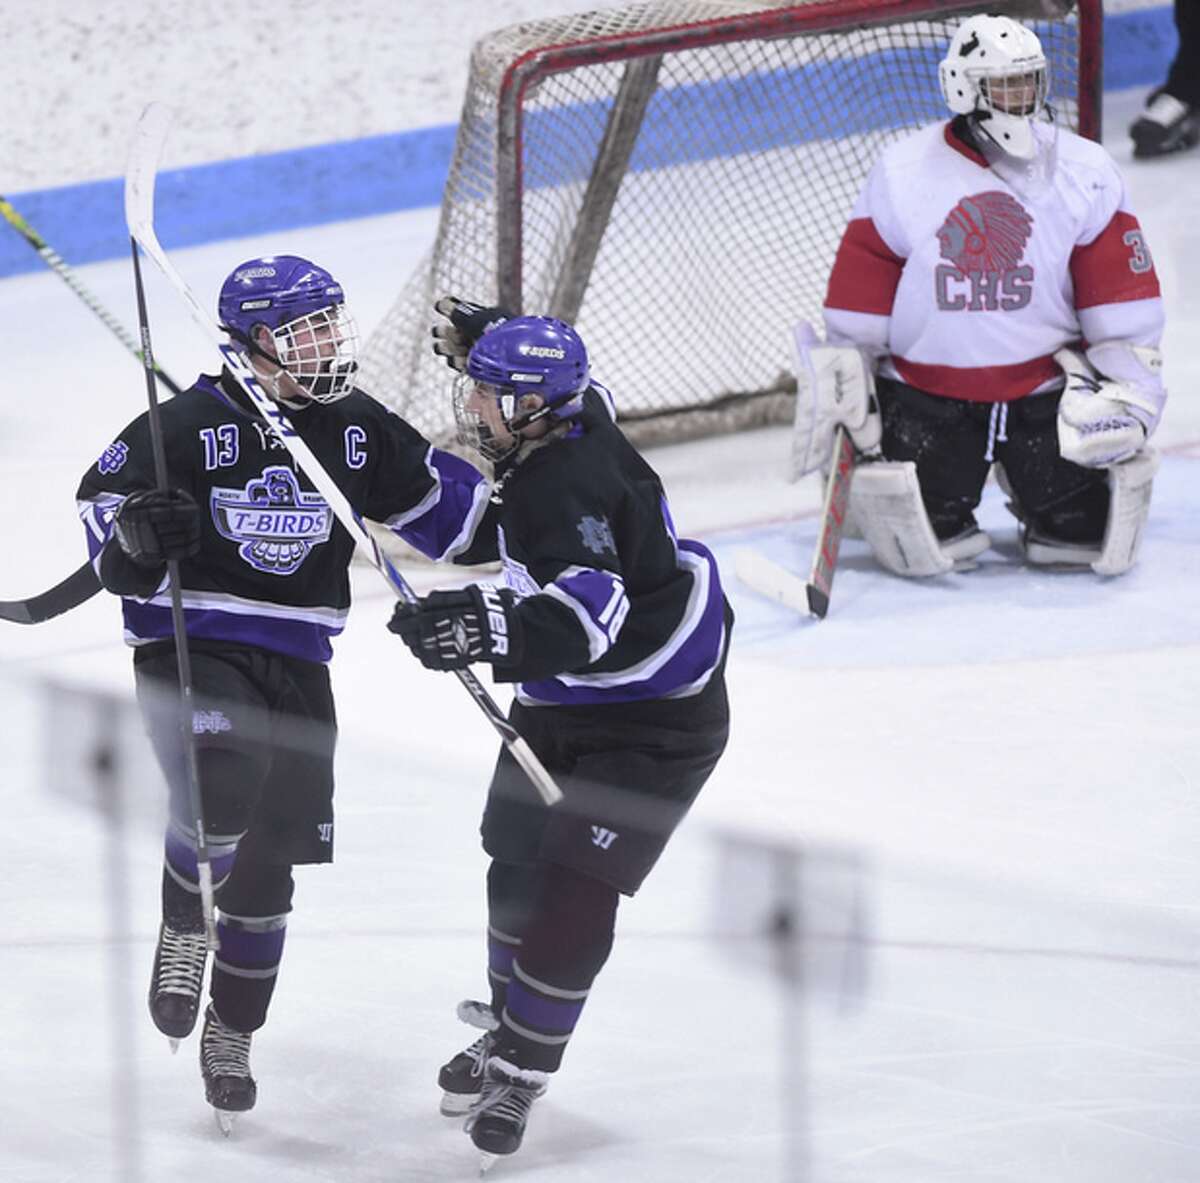 North Branford’s Alec Martone (left) celebrates with a teammate during the Division II semifinals at Ingalls Rink. (Photo Arnold Gold)